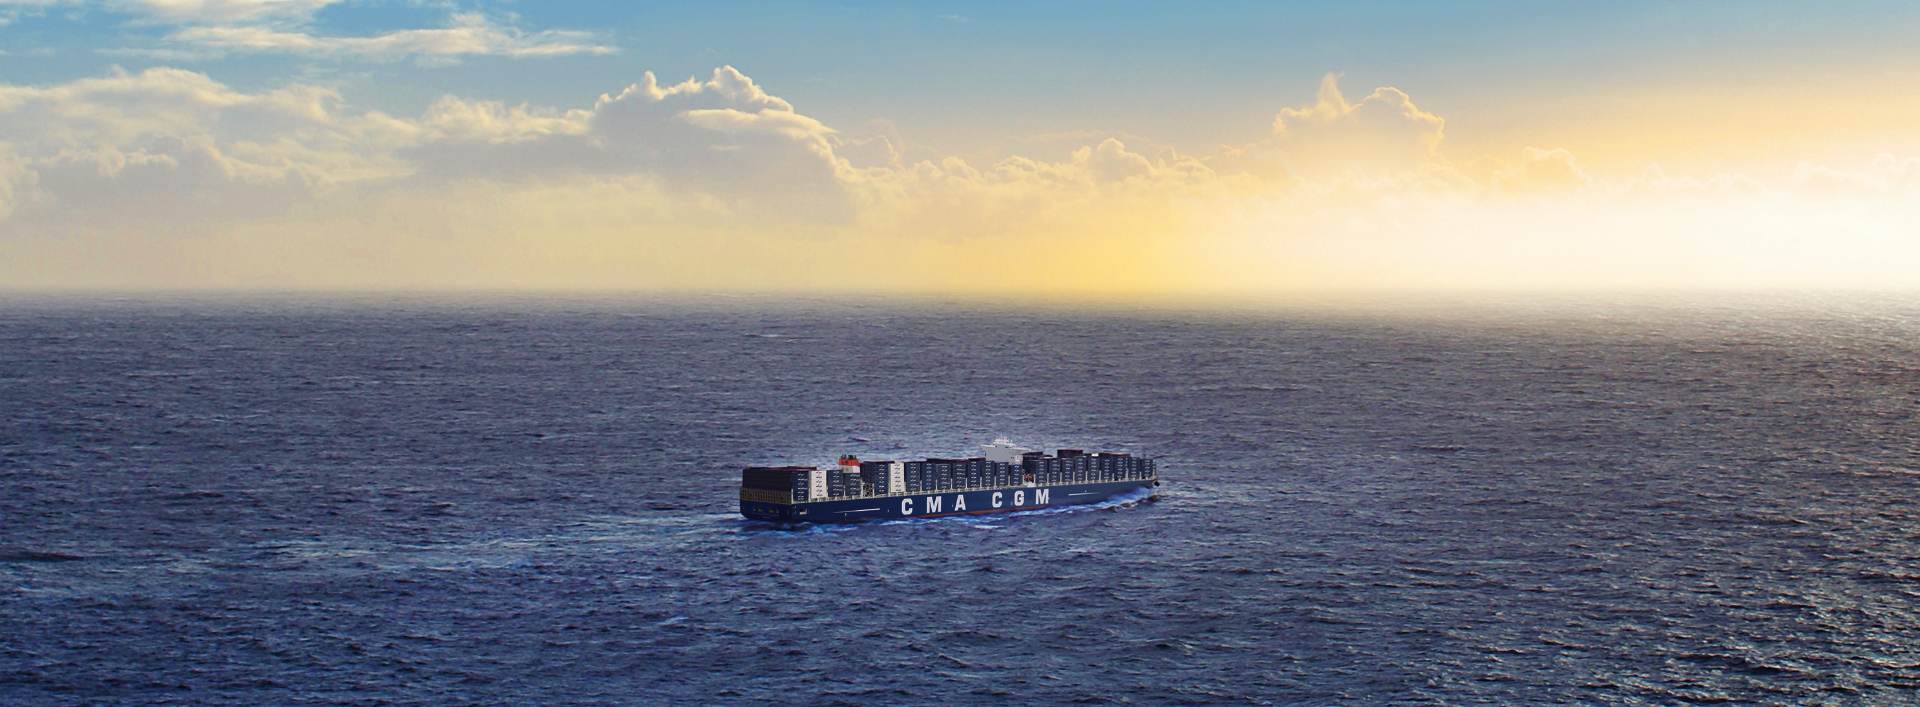 CMA CGM and Total sign a major agreement for the supply of Liquefied Natural Gas for CMA CGM’s 15,000-TEU container ships